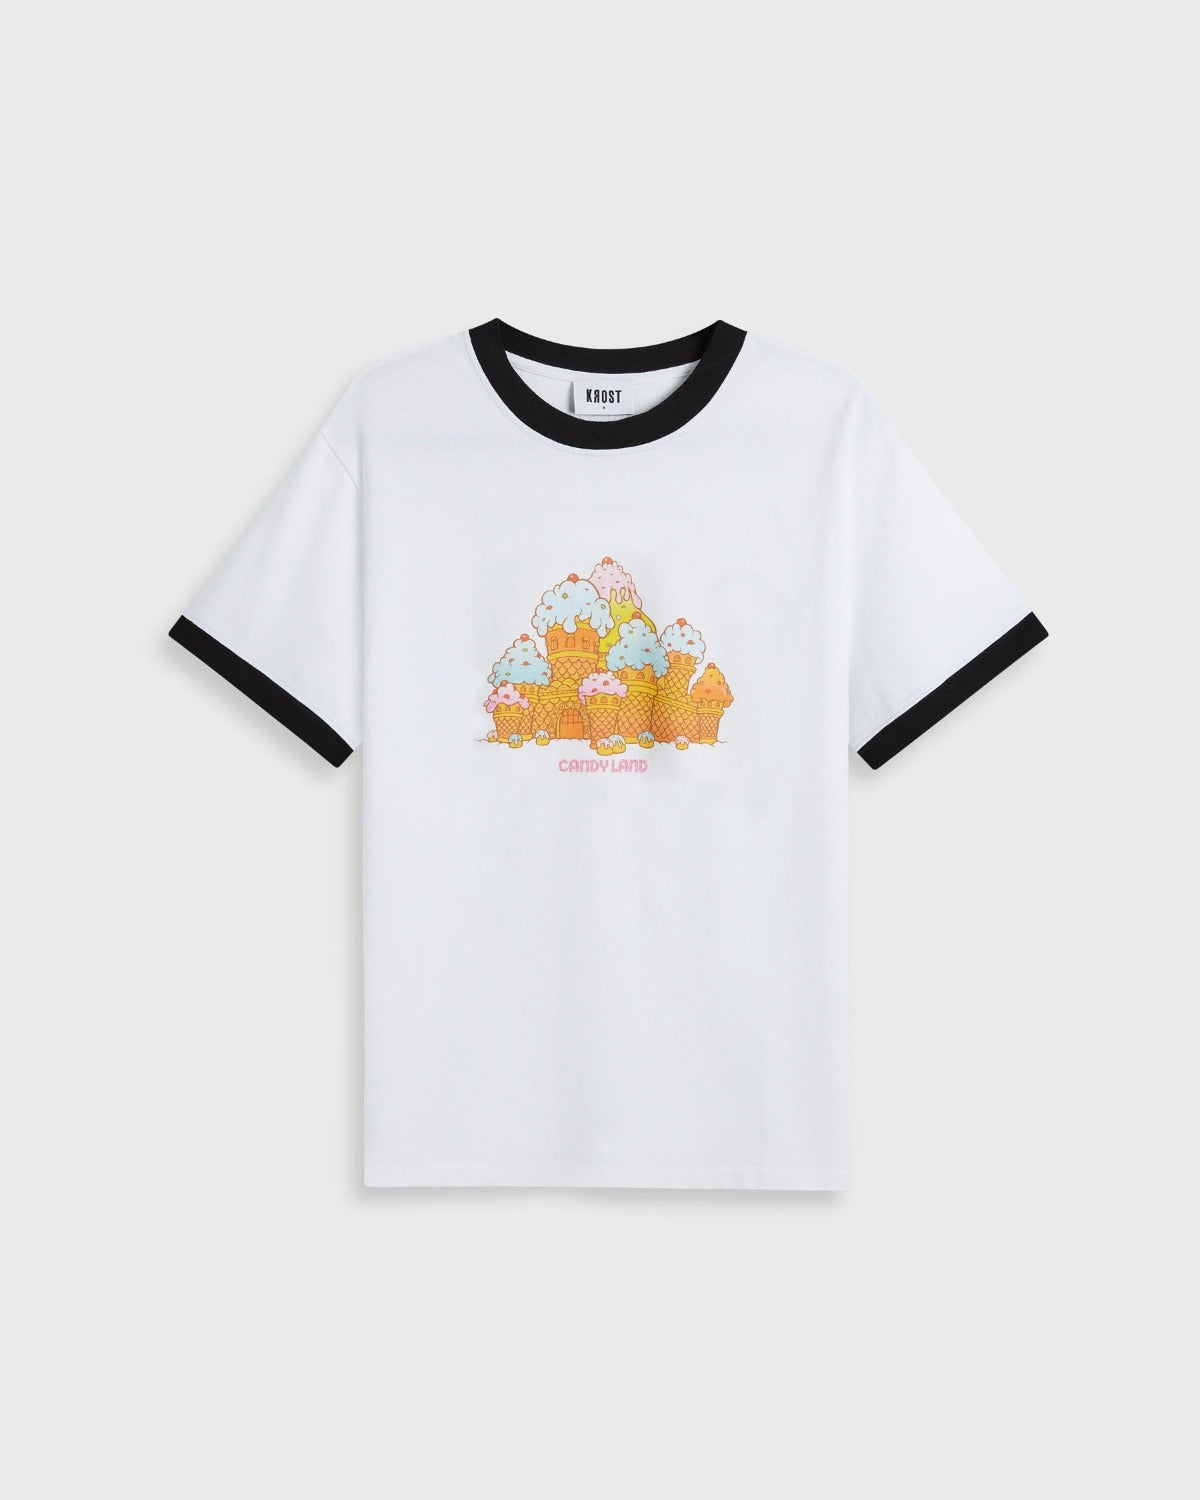 Photo of KROST x Candy Land | Gum Drop Short Sleeve Tee, number 2